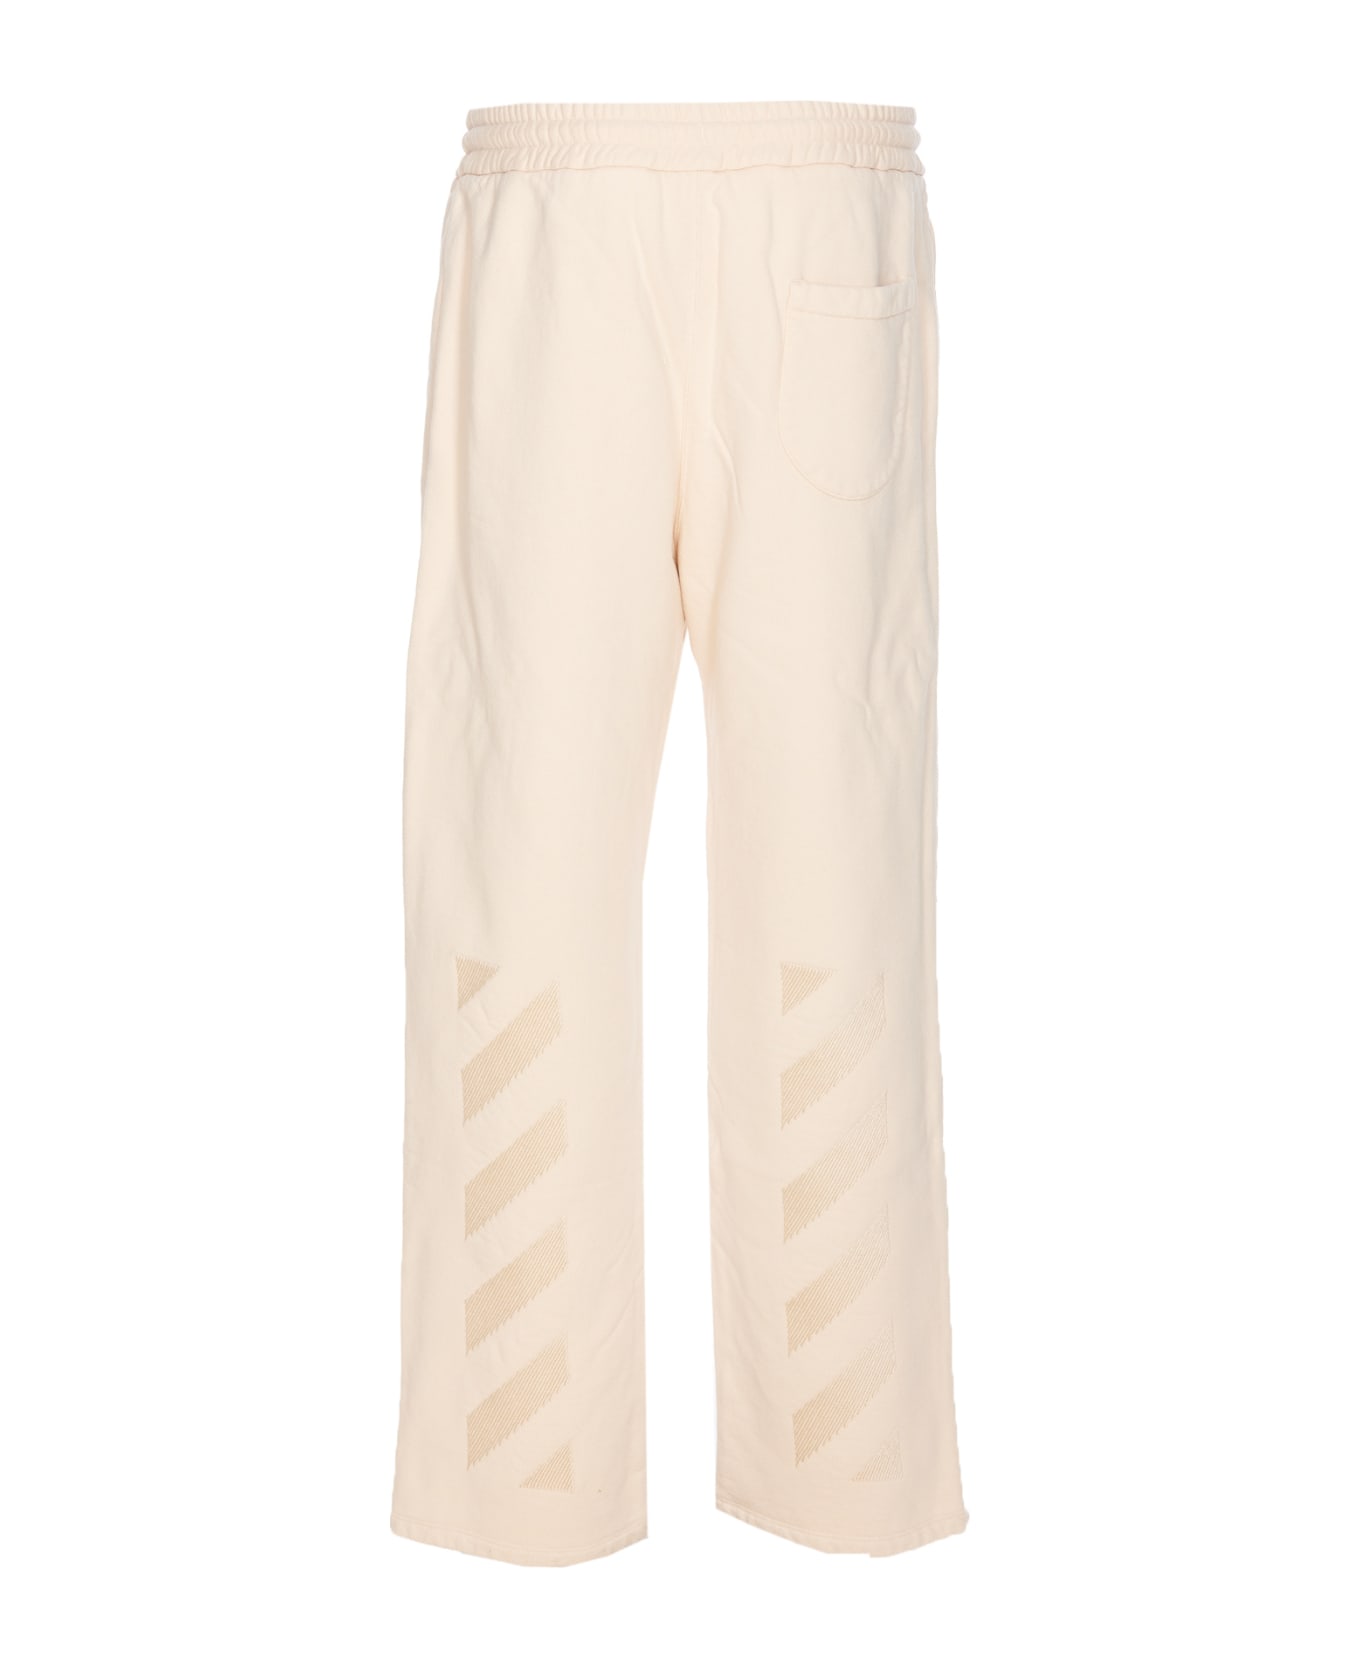 Off-White Cornely Diags Pants - White ボトムス